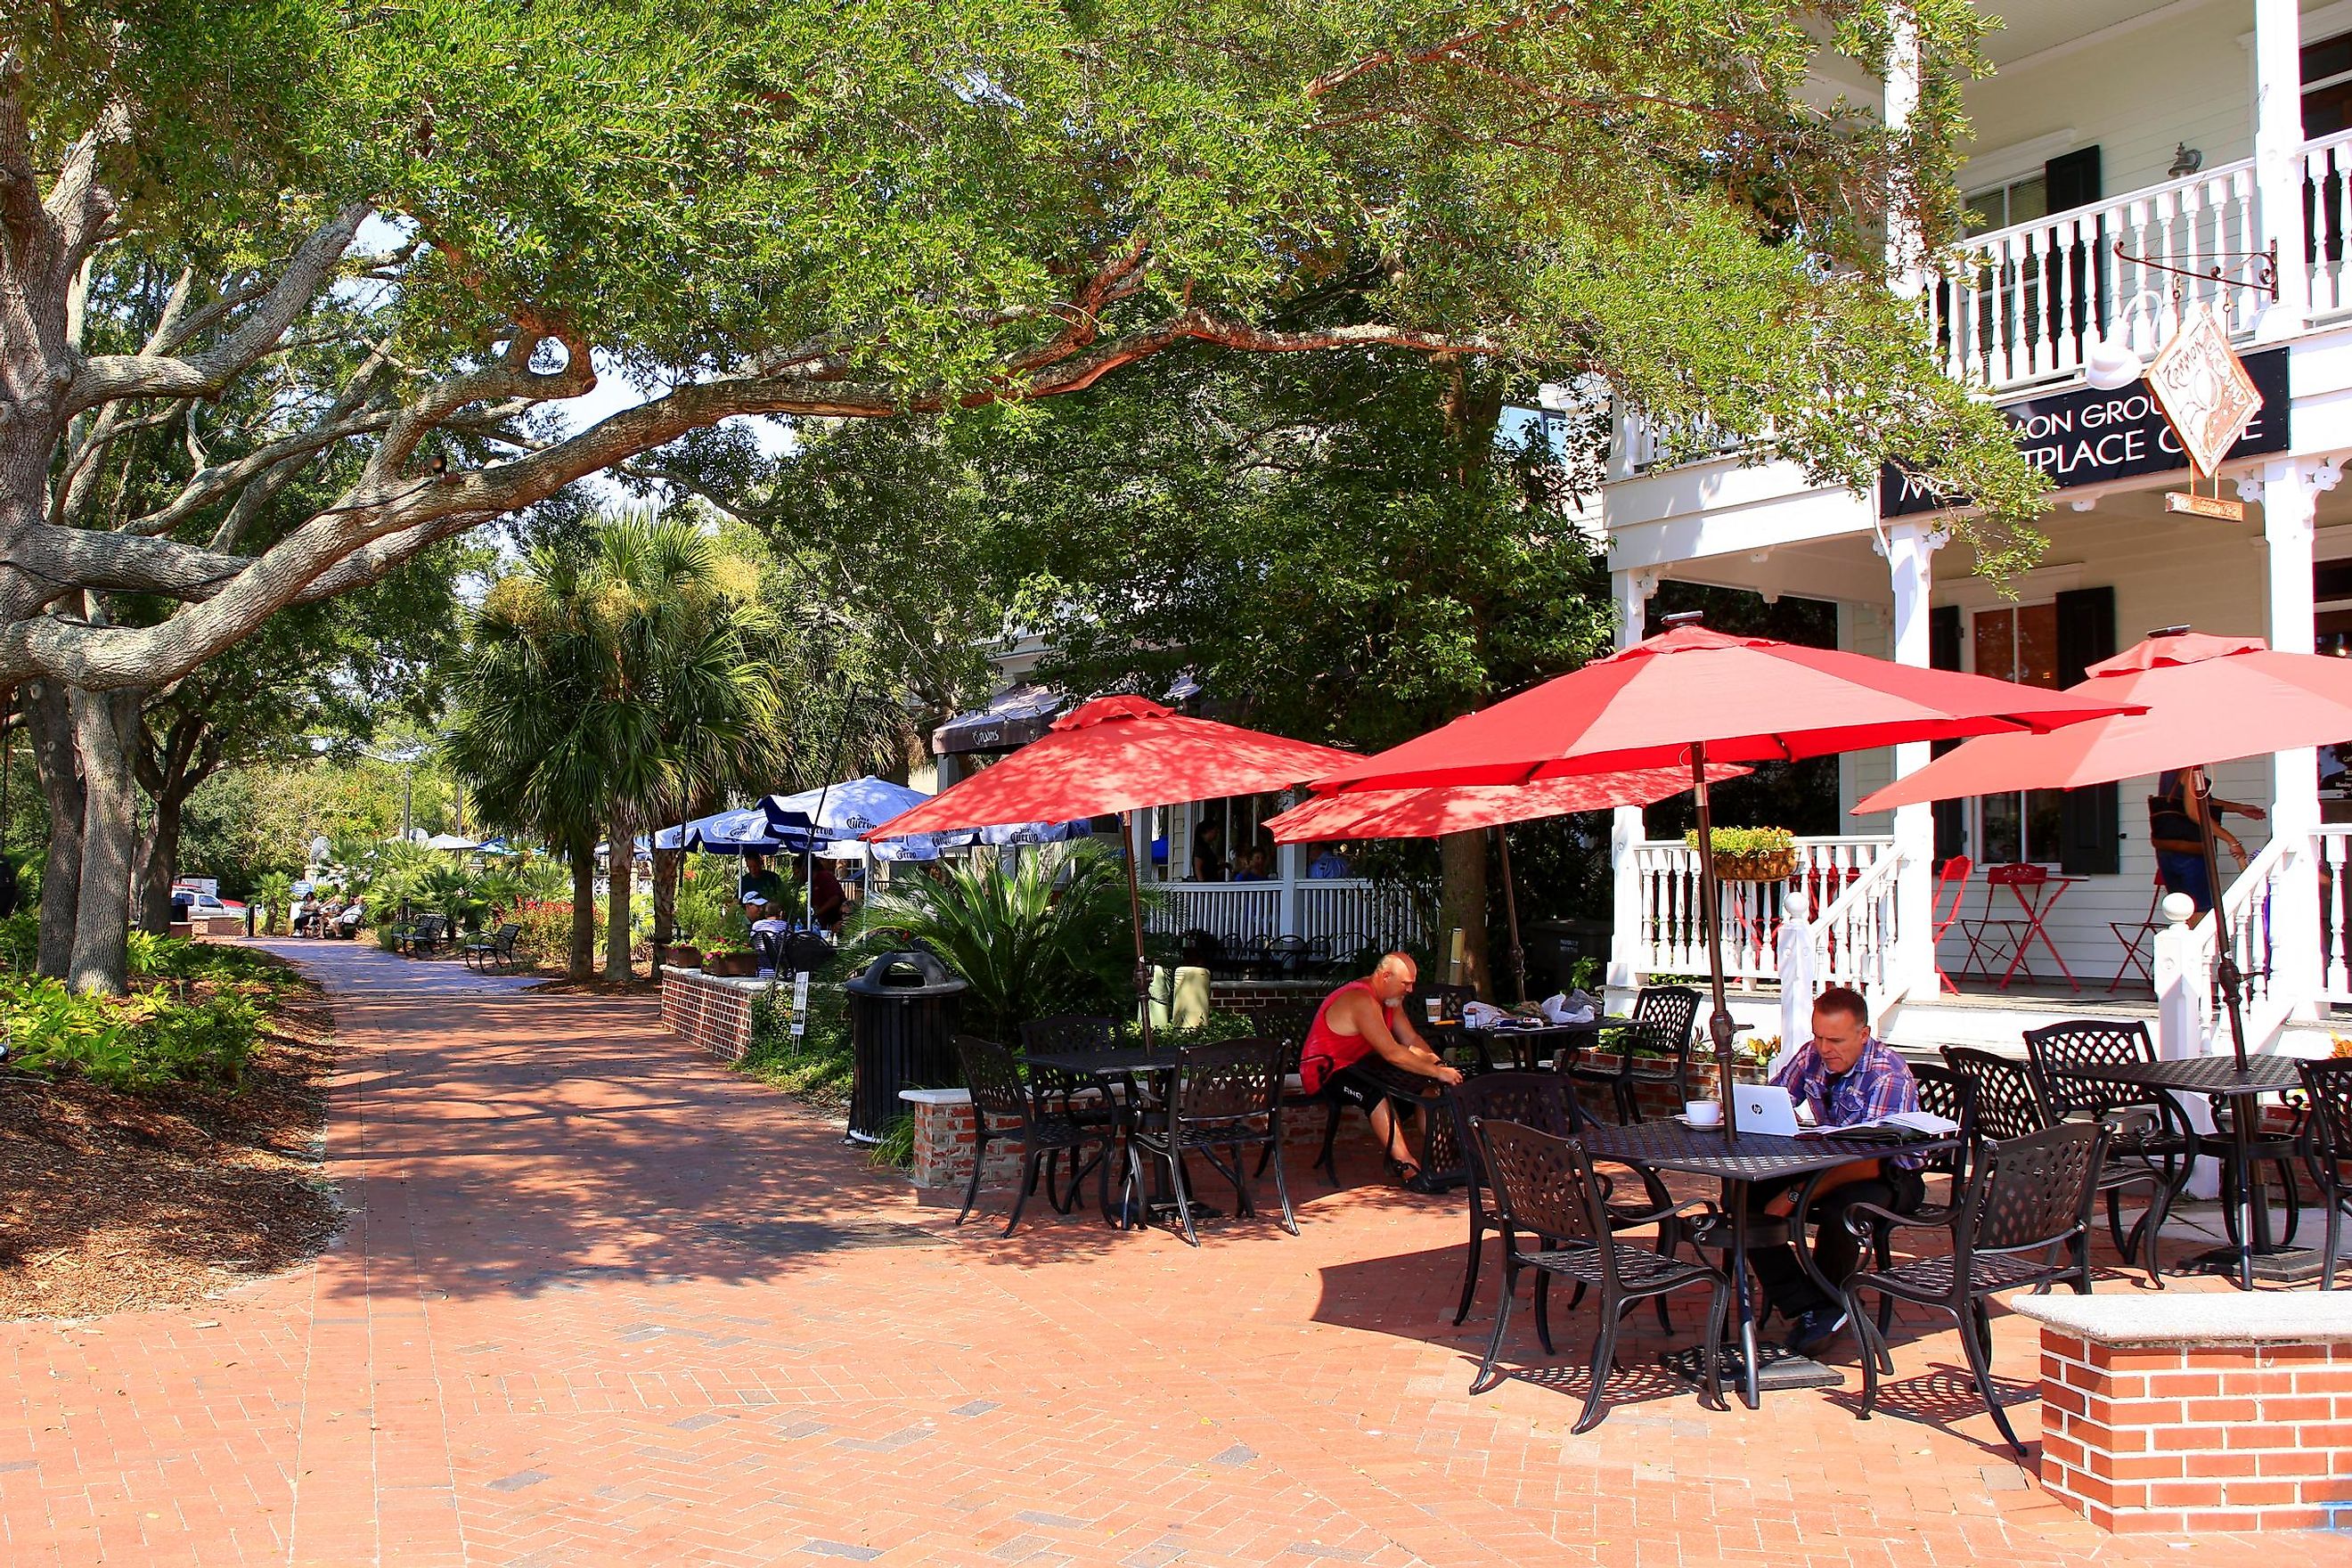 People dining outside a restaurant in Henry C. Chambers Waterfront Park in Beaufort, SC